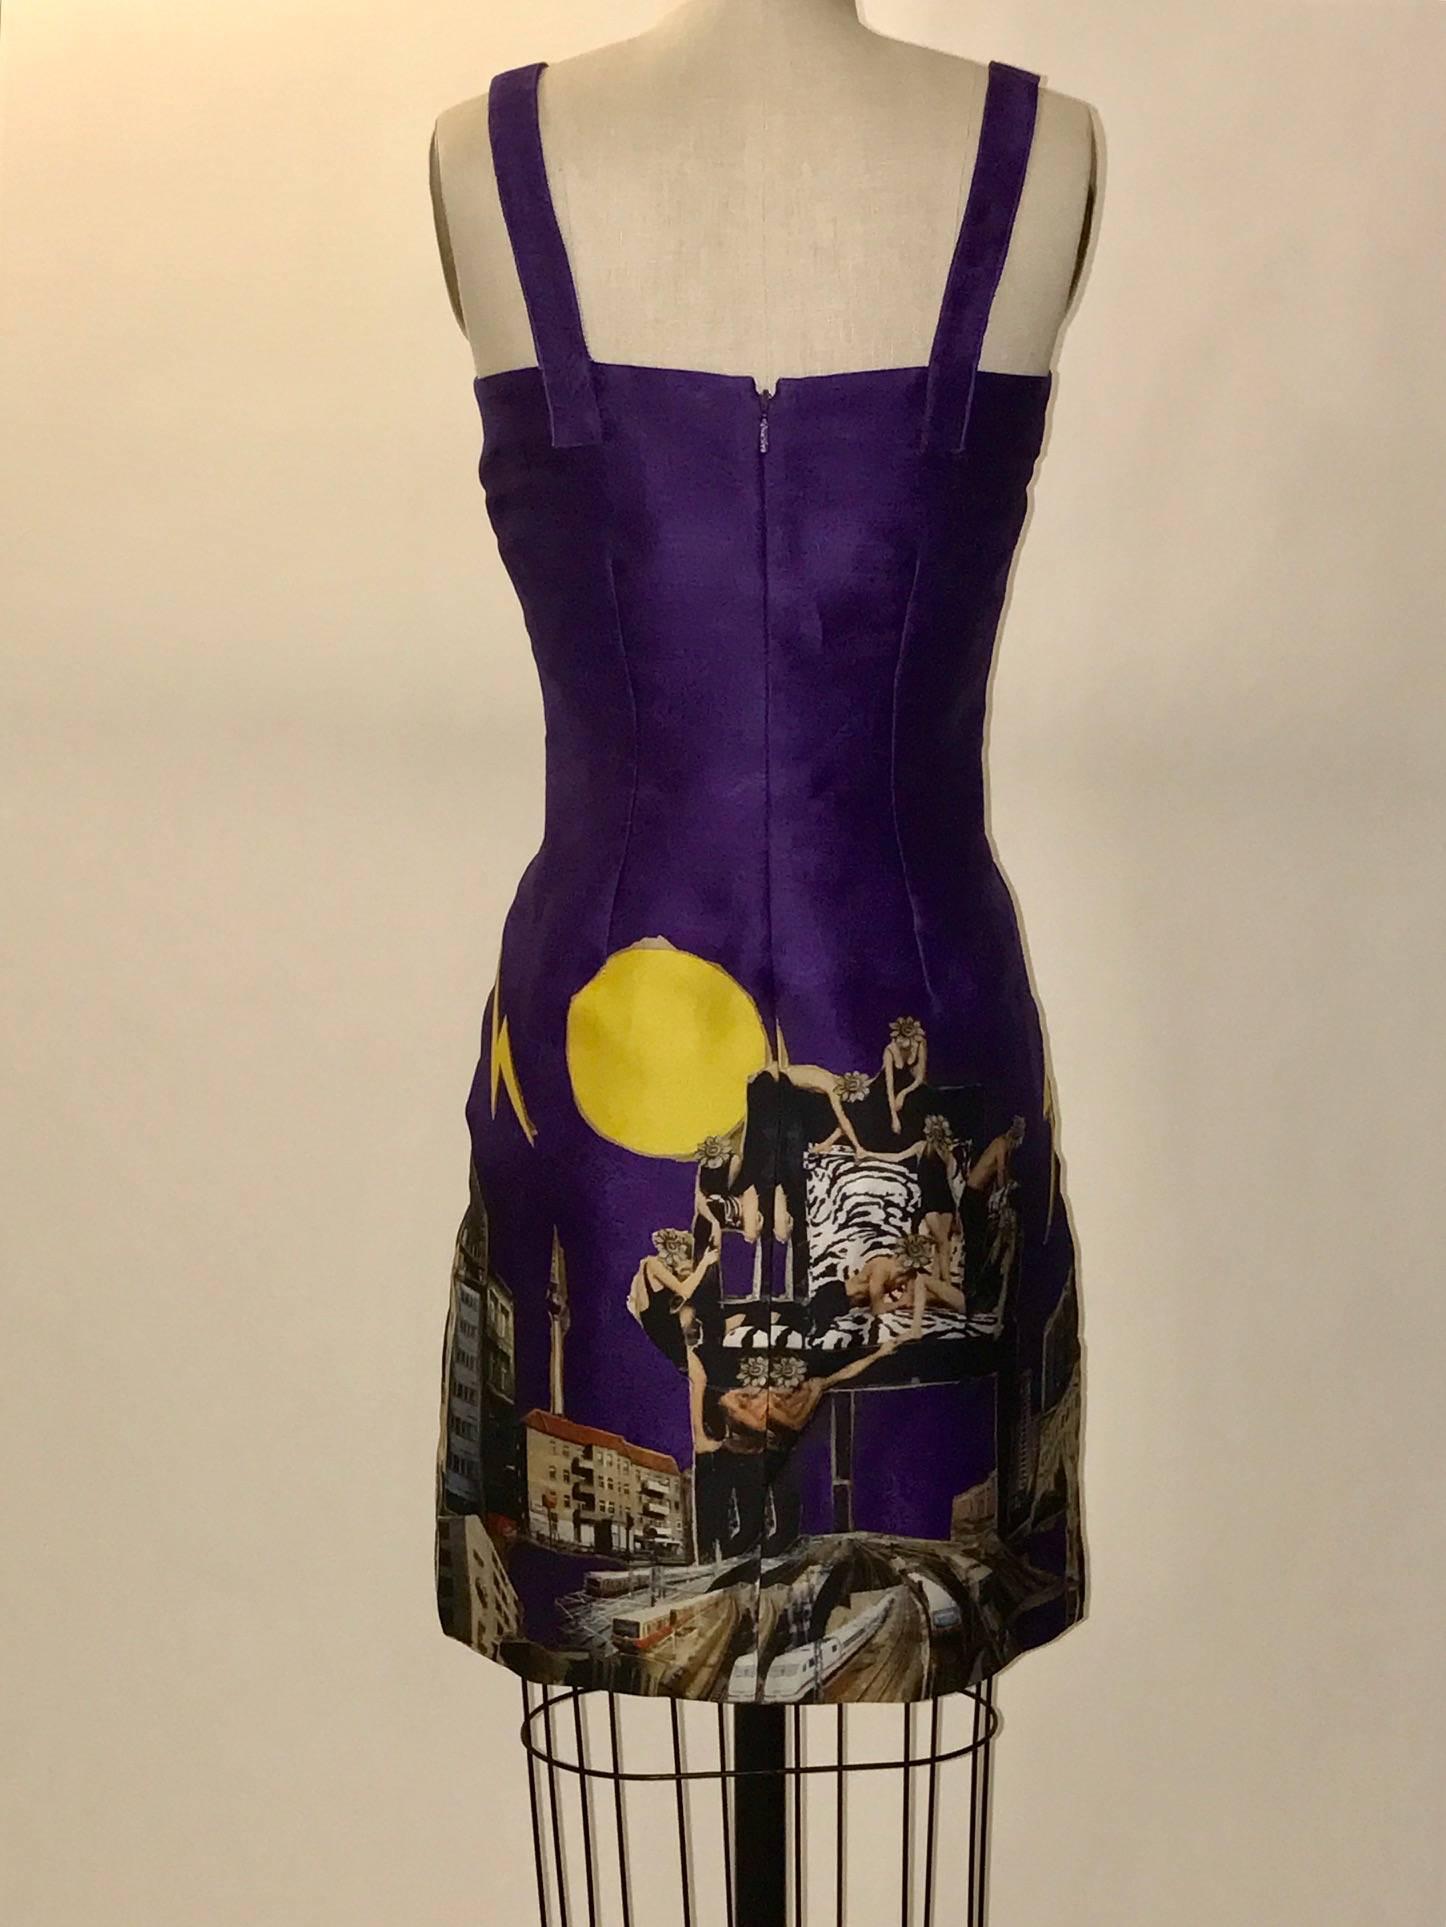 Versace Fall 2008 purple silk sleeveless dress printed with a collage of Dutch artist Tim Roeloffs' photography. Flower-headed models climb a giant chair amid a city scape at front and back skirt. Back Versace-branded zip.

100% silk. 
Fully lined